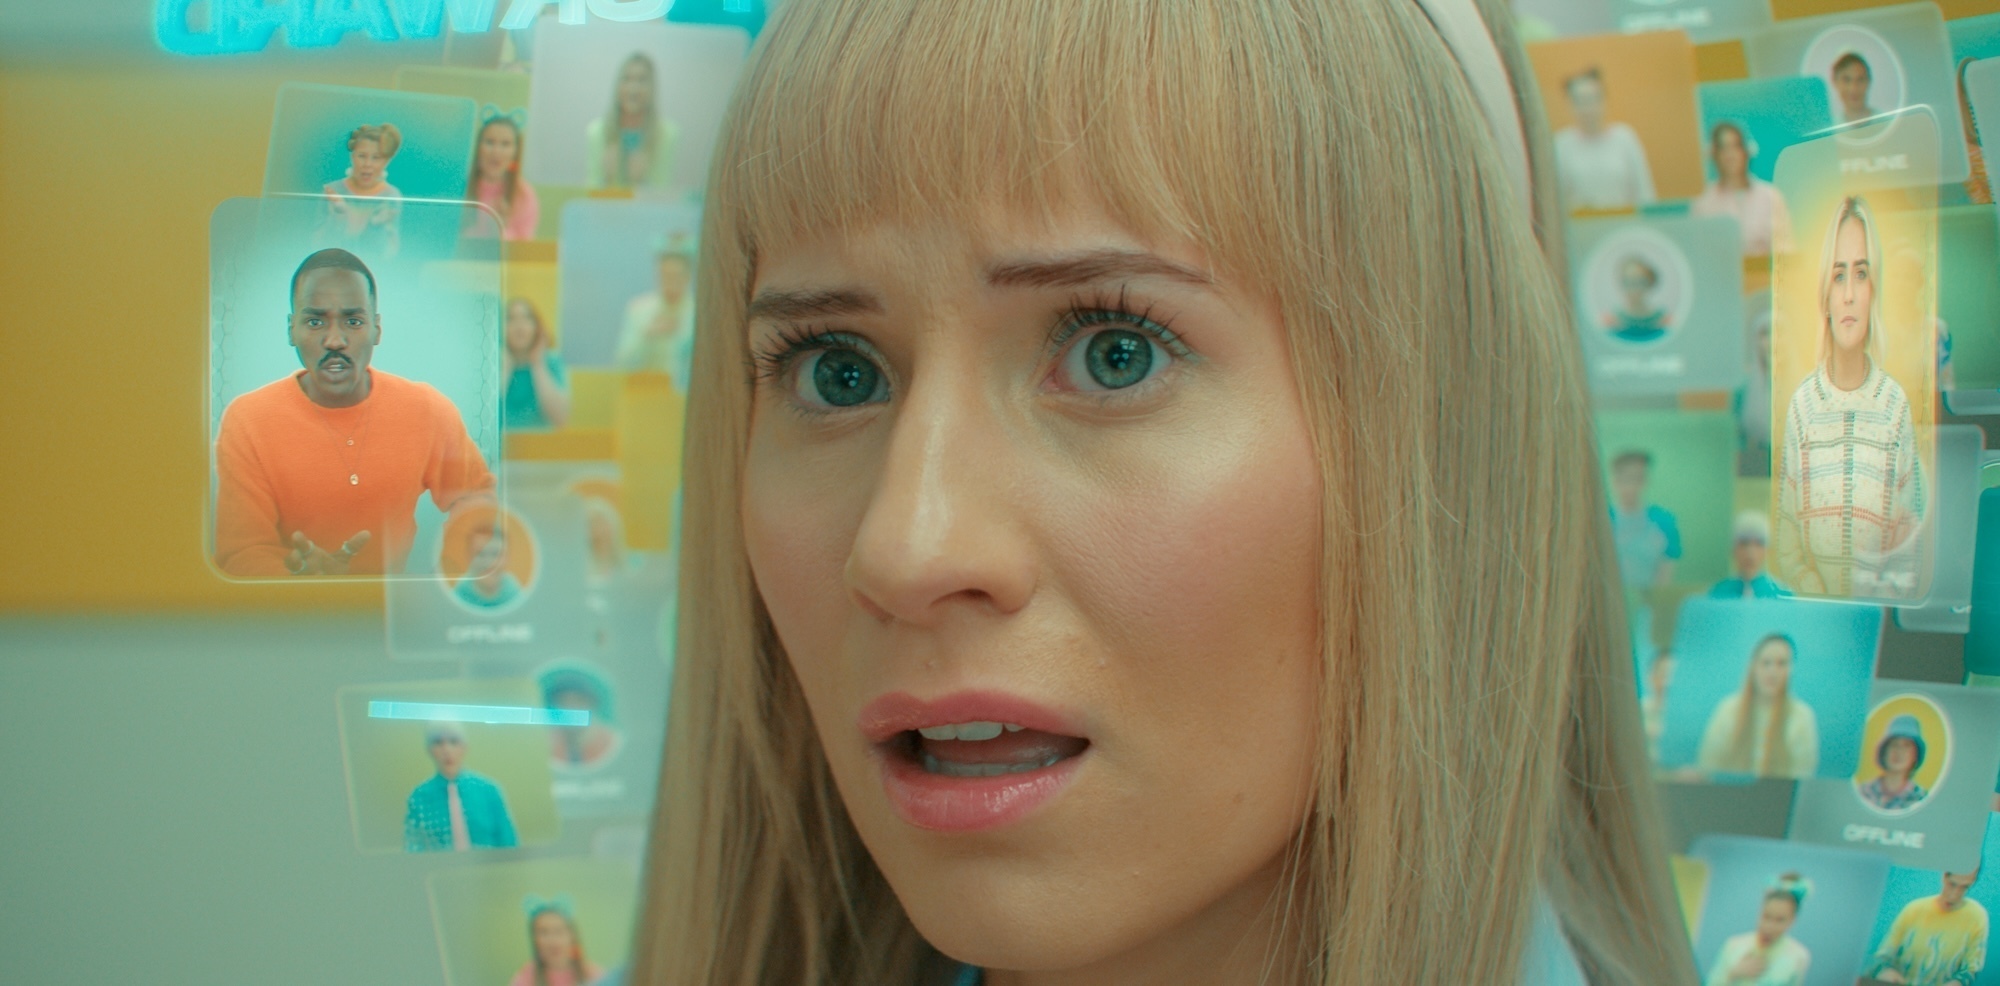 A close up of Lindy, her face visible behind a bunch of transparent screens projected around her face in the Doctor Who episode “Dot and Bubble.”